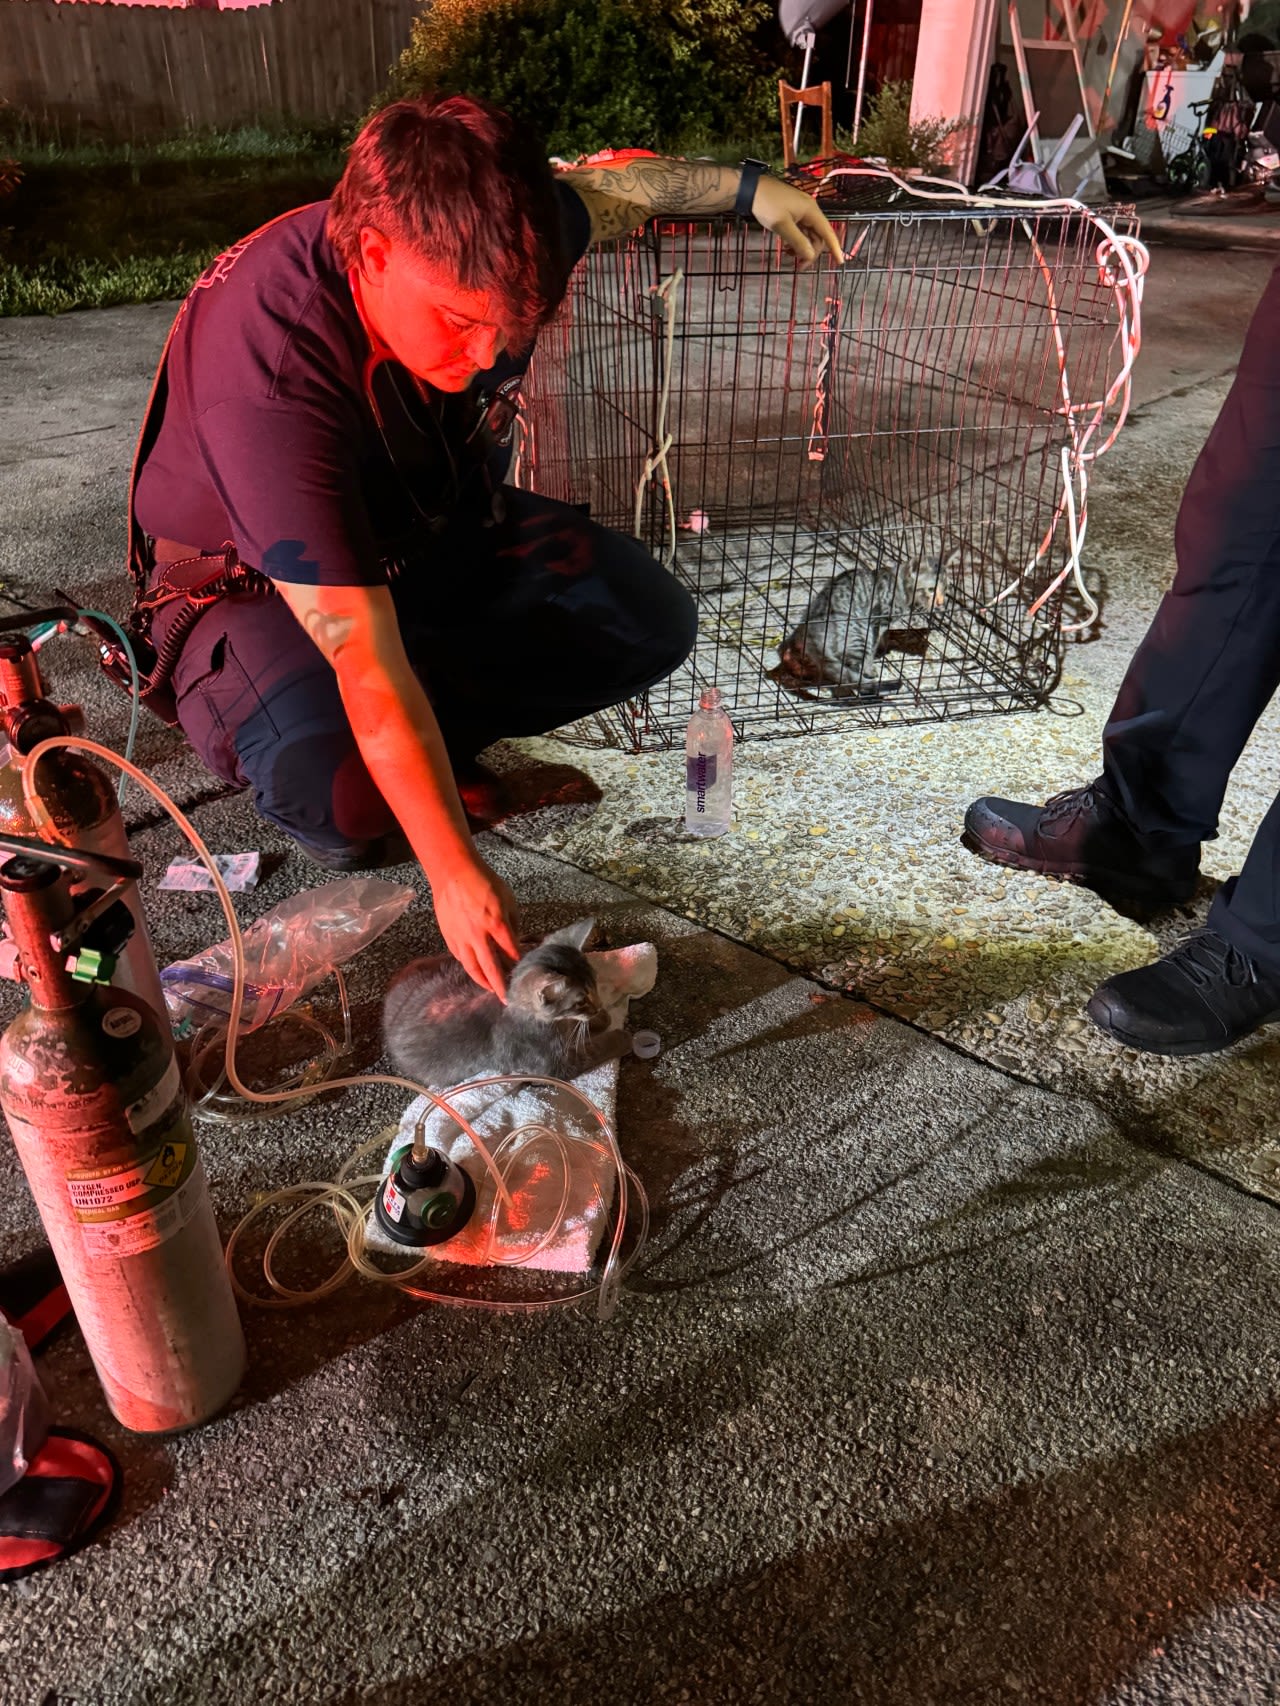 Panama City Fire Department rescued three kittens from a structure fire